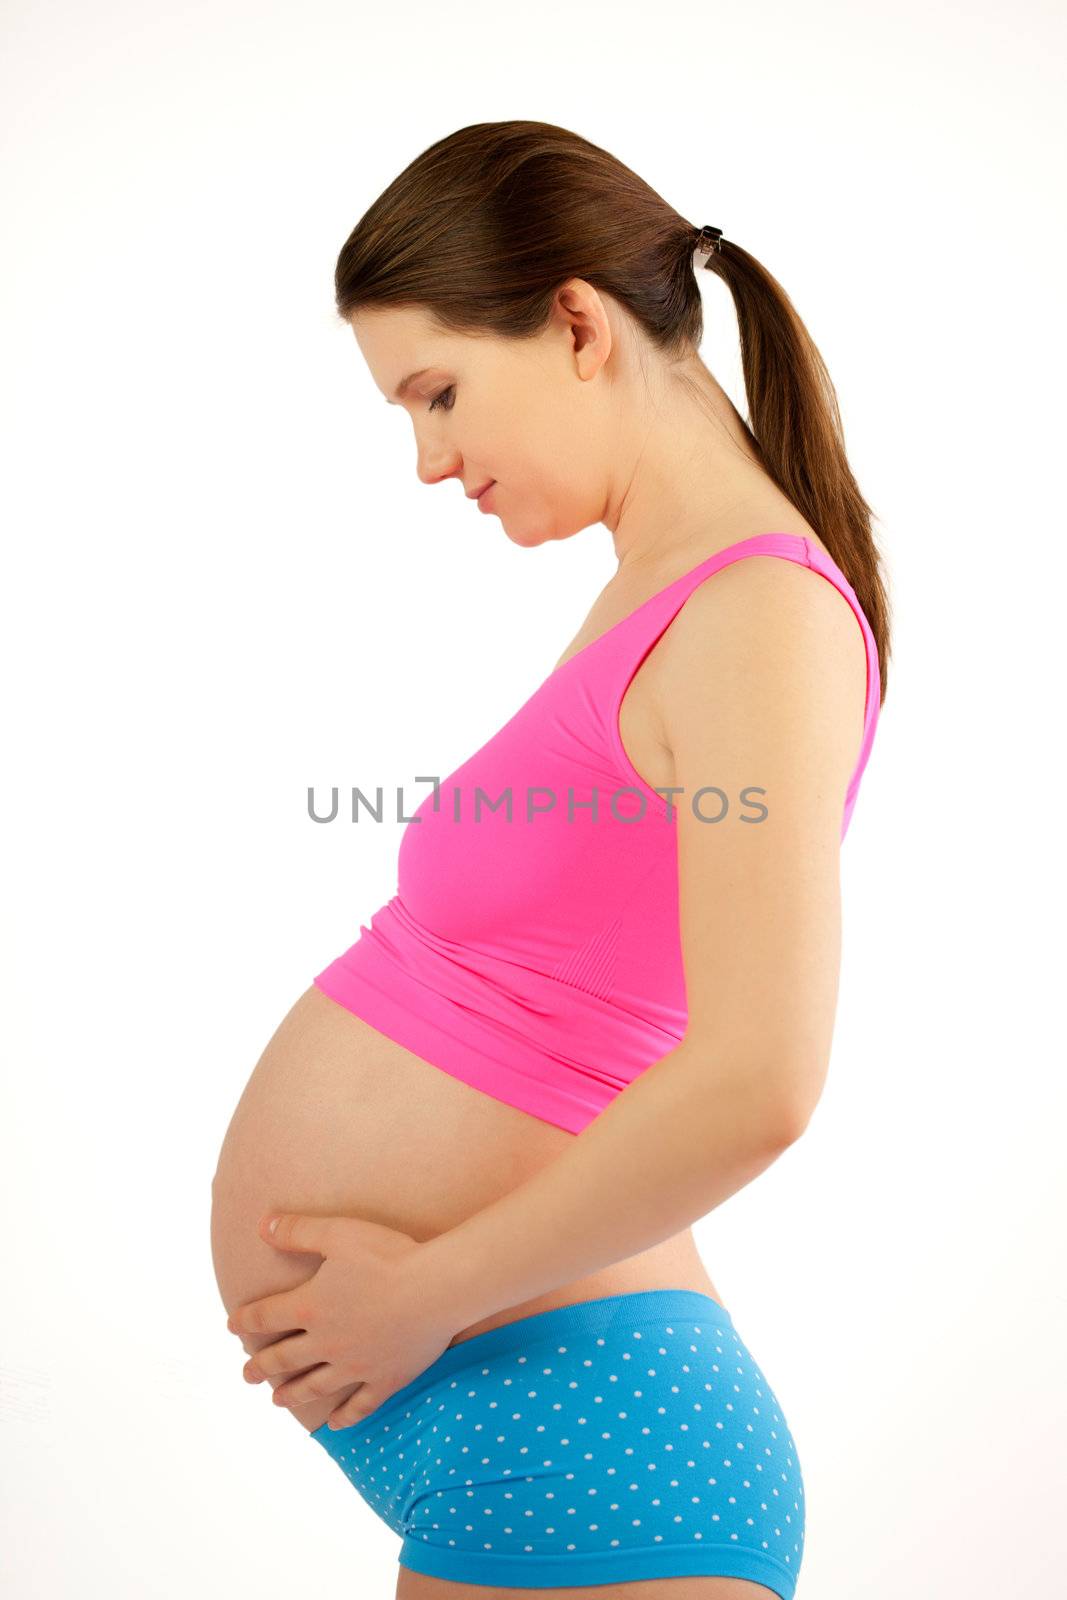 Pregnant belly. Healthy pregnant women in pink shirt and blue shorts holding her round berry with hands. White background.